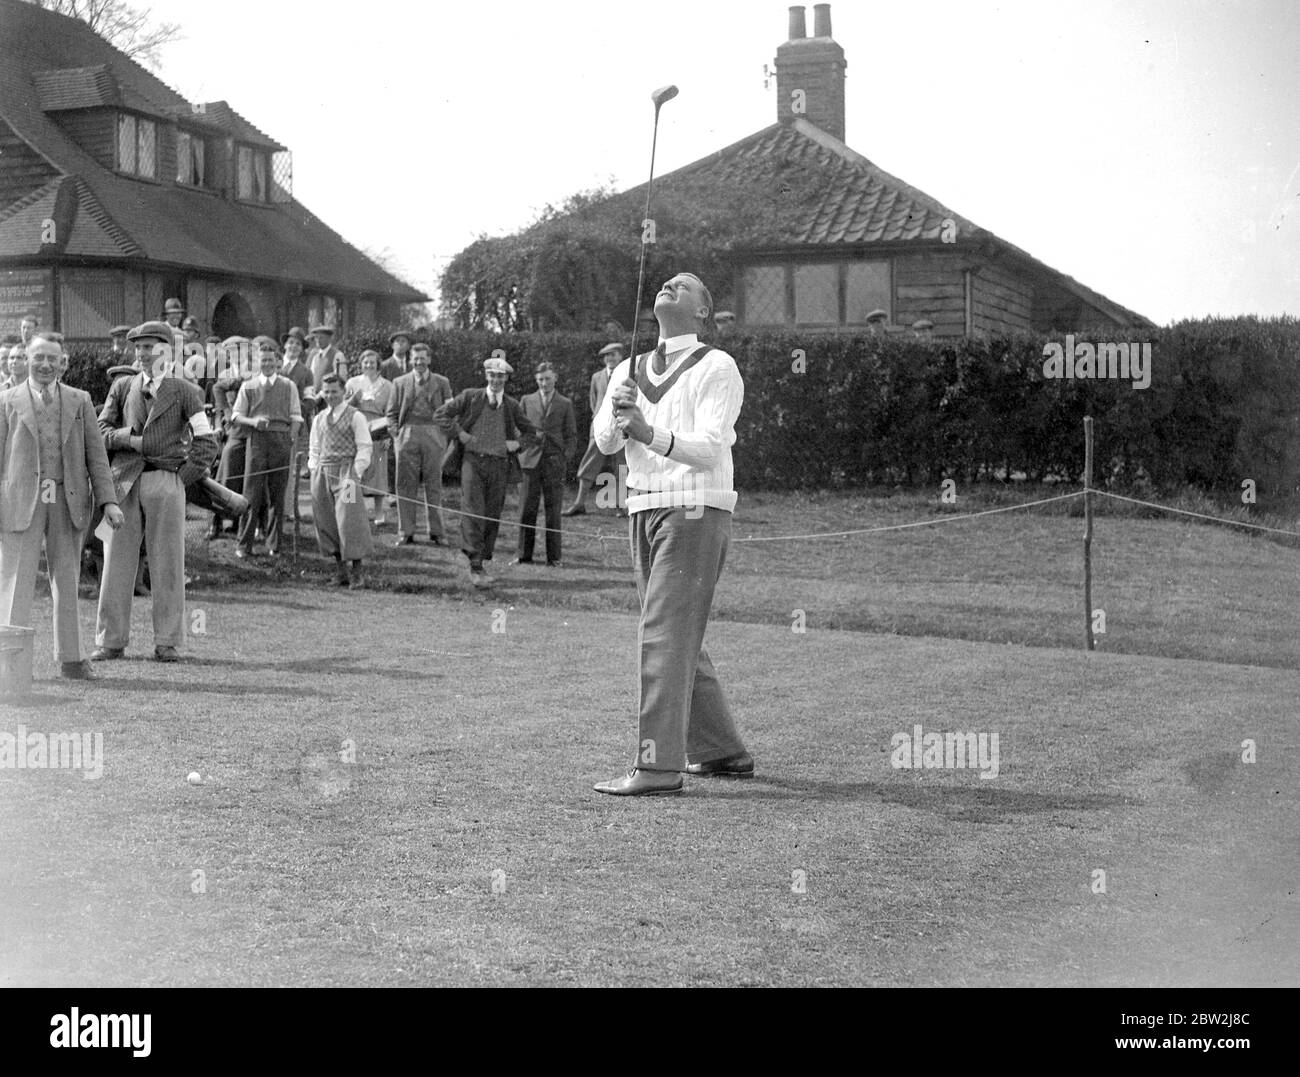 Australian cricket player, Bill Woodfull, playing golf in front of spectators. Stock Photo